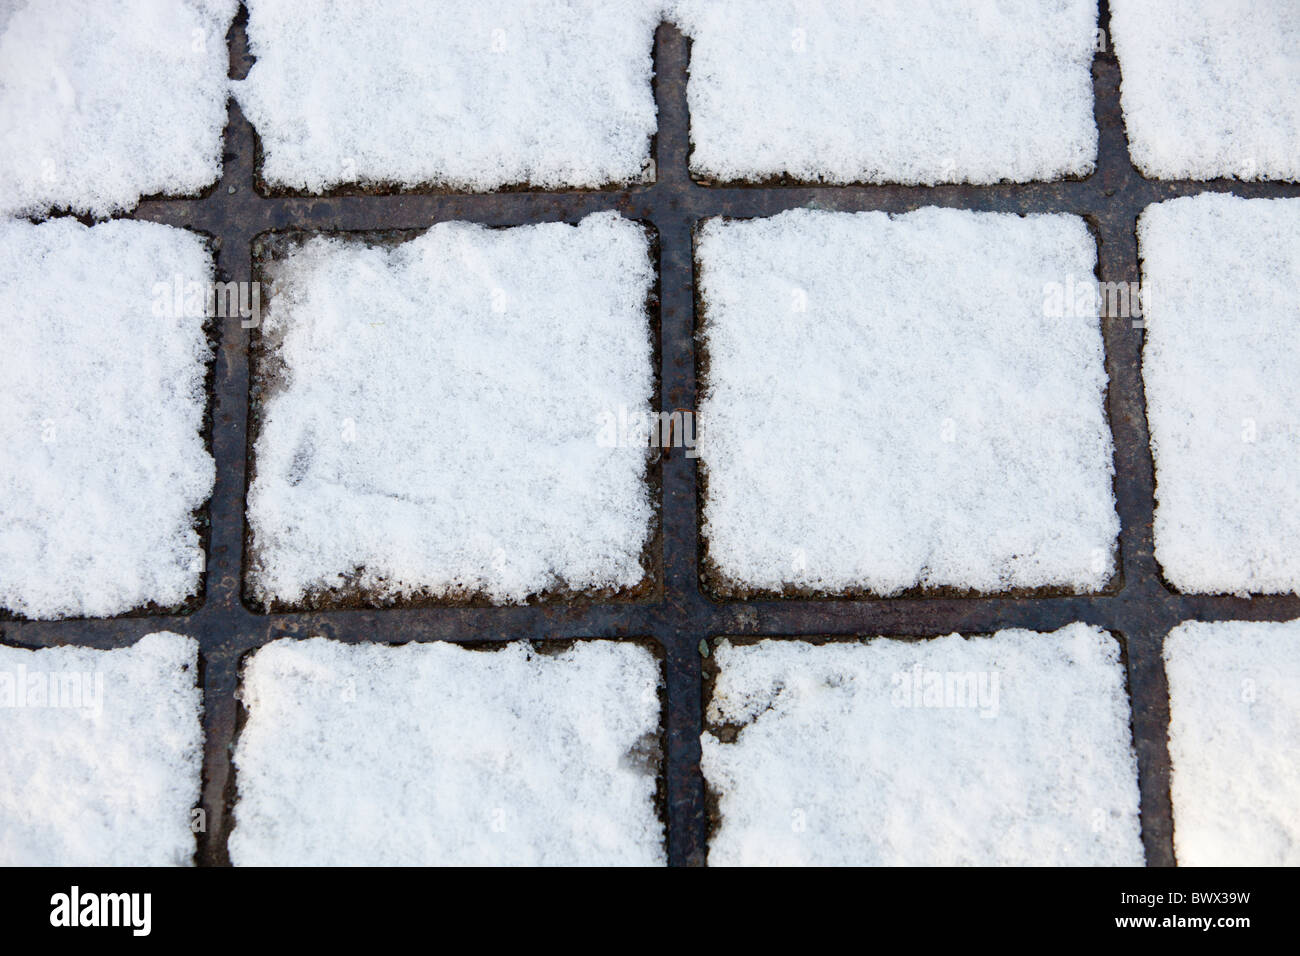 A pattern formed by snow melt on a man hole cover. Stock Photo